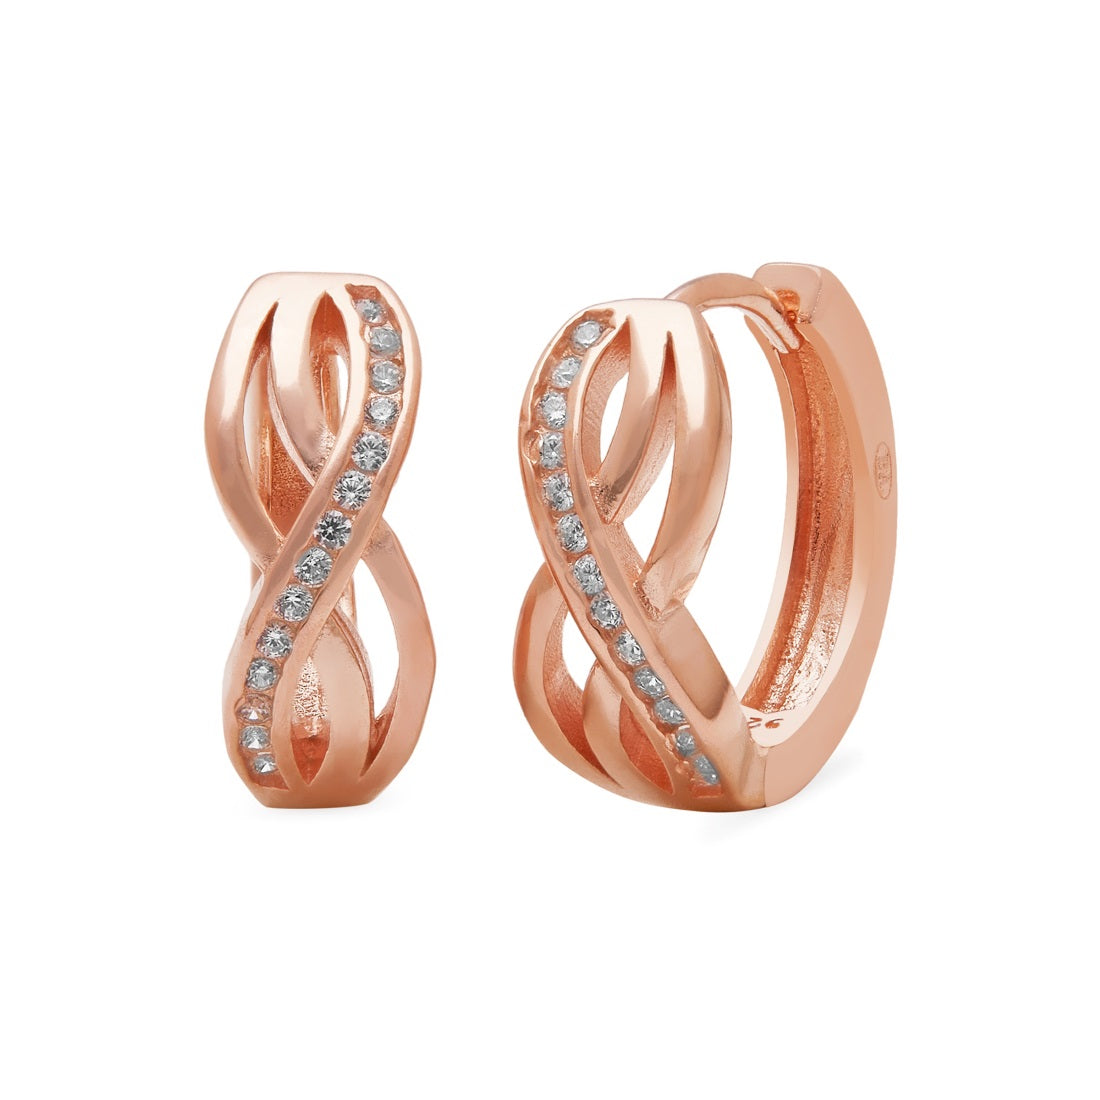 Radiant Hoops 925 Sterling Silver Rose Gold-Plated Earrings